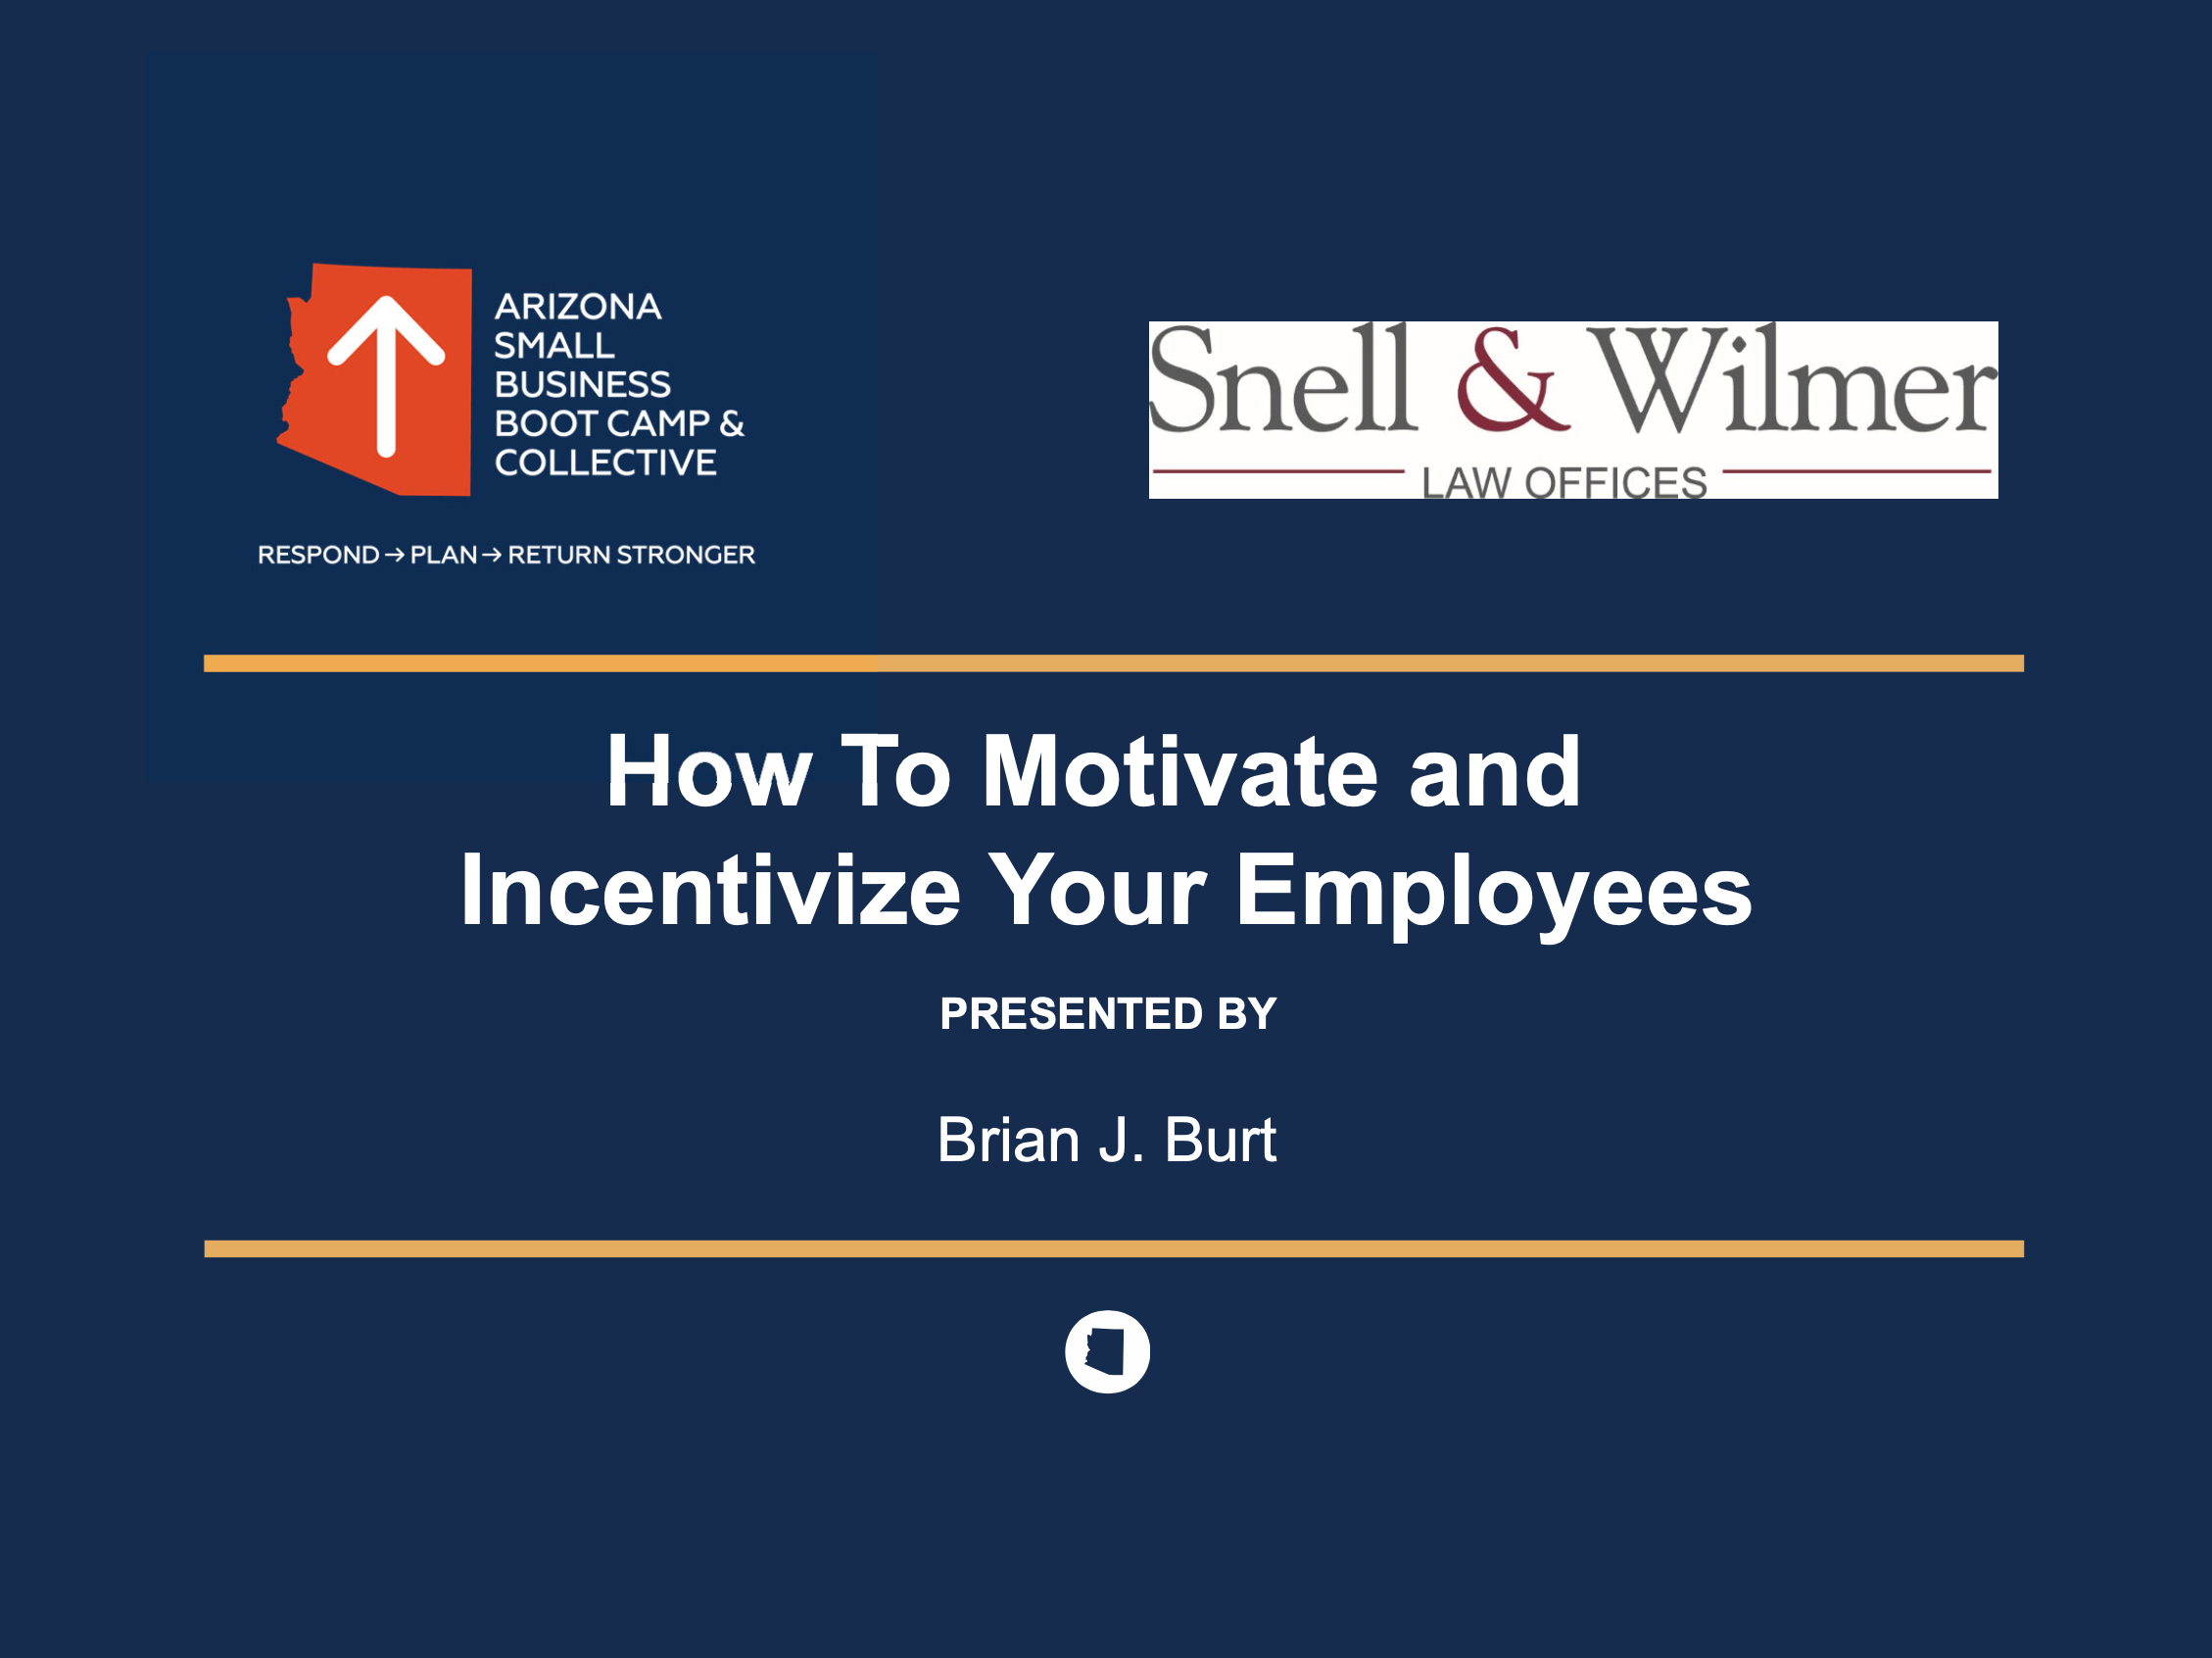 How to Motivate and Incentivize Employees